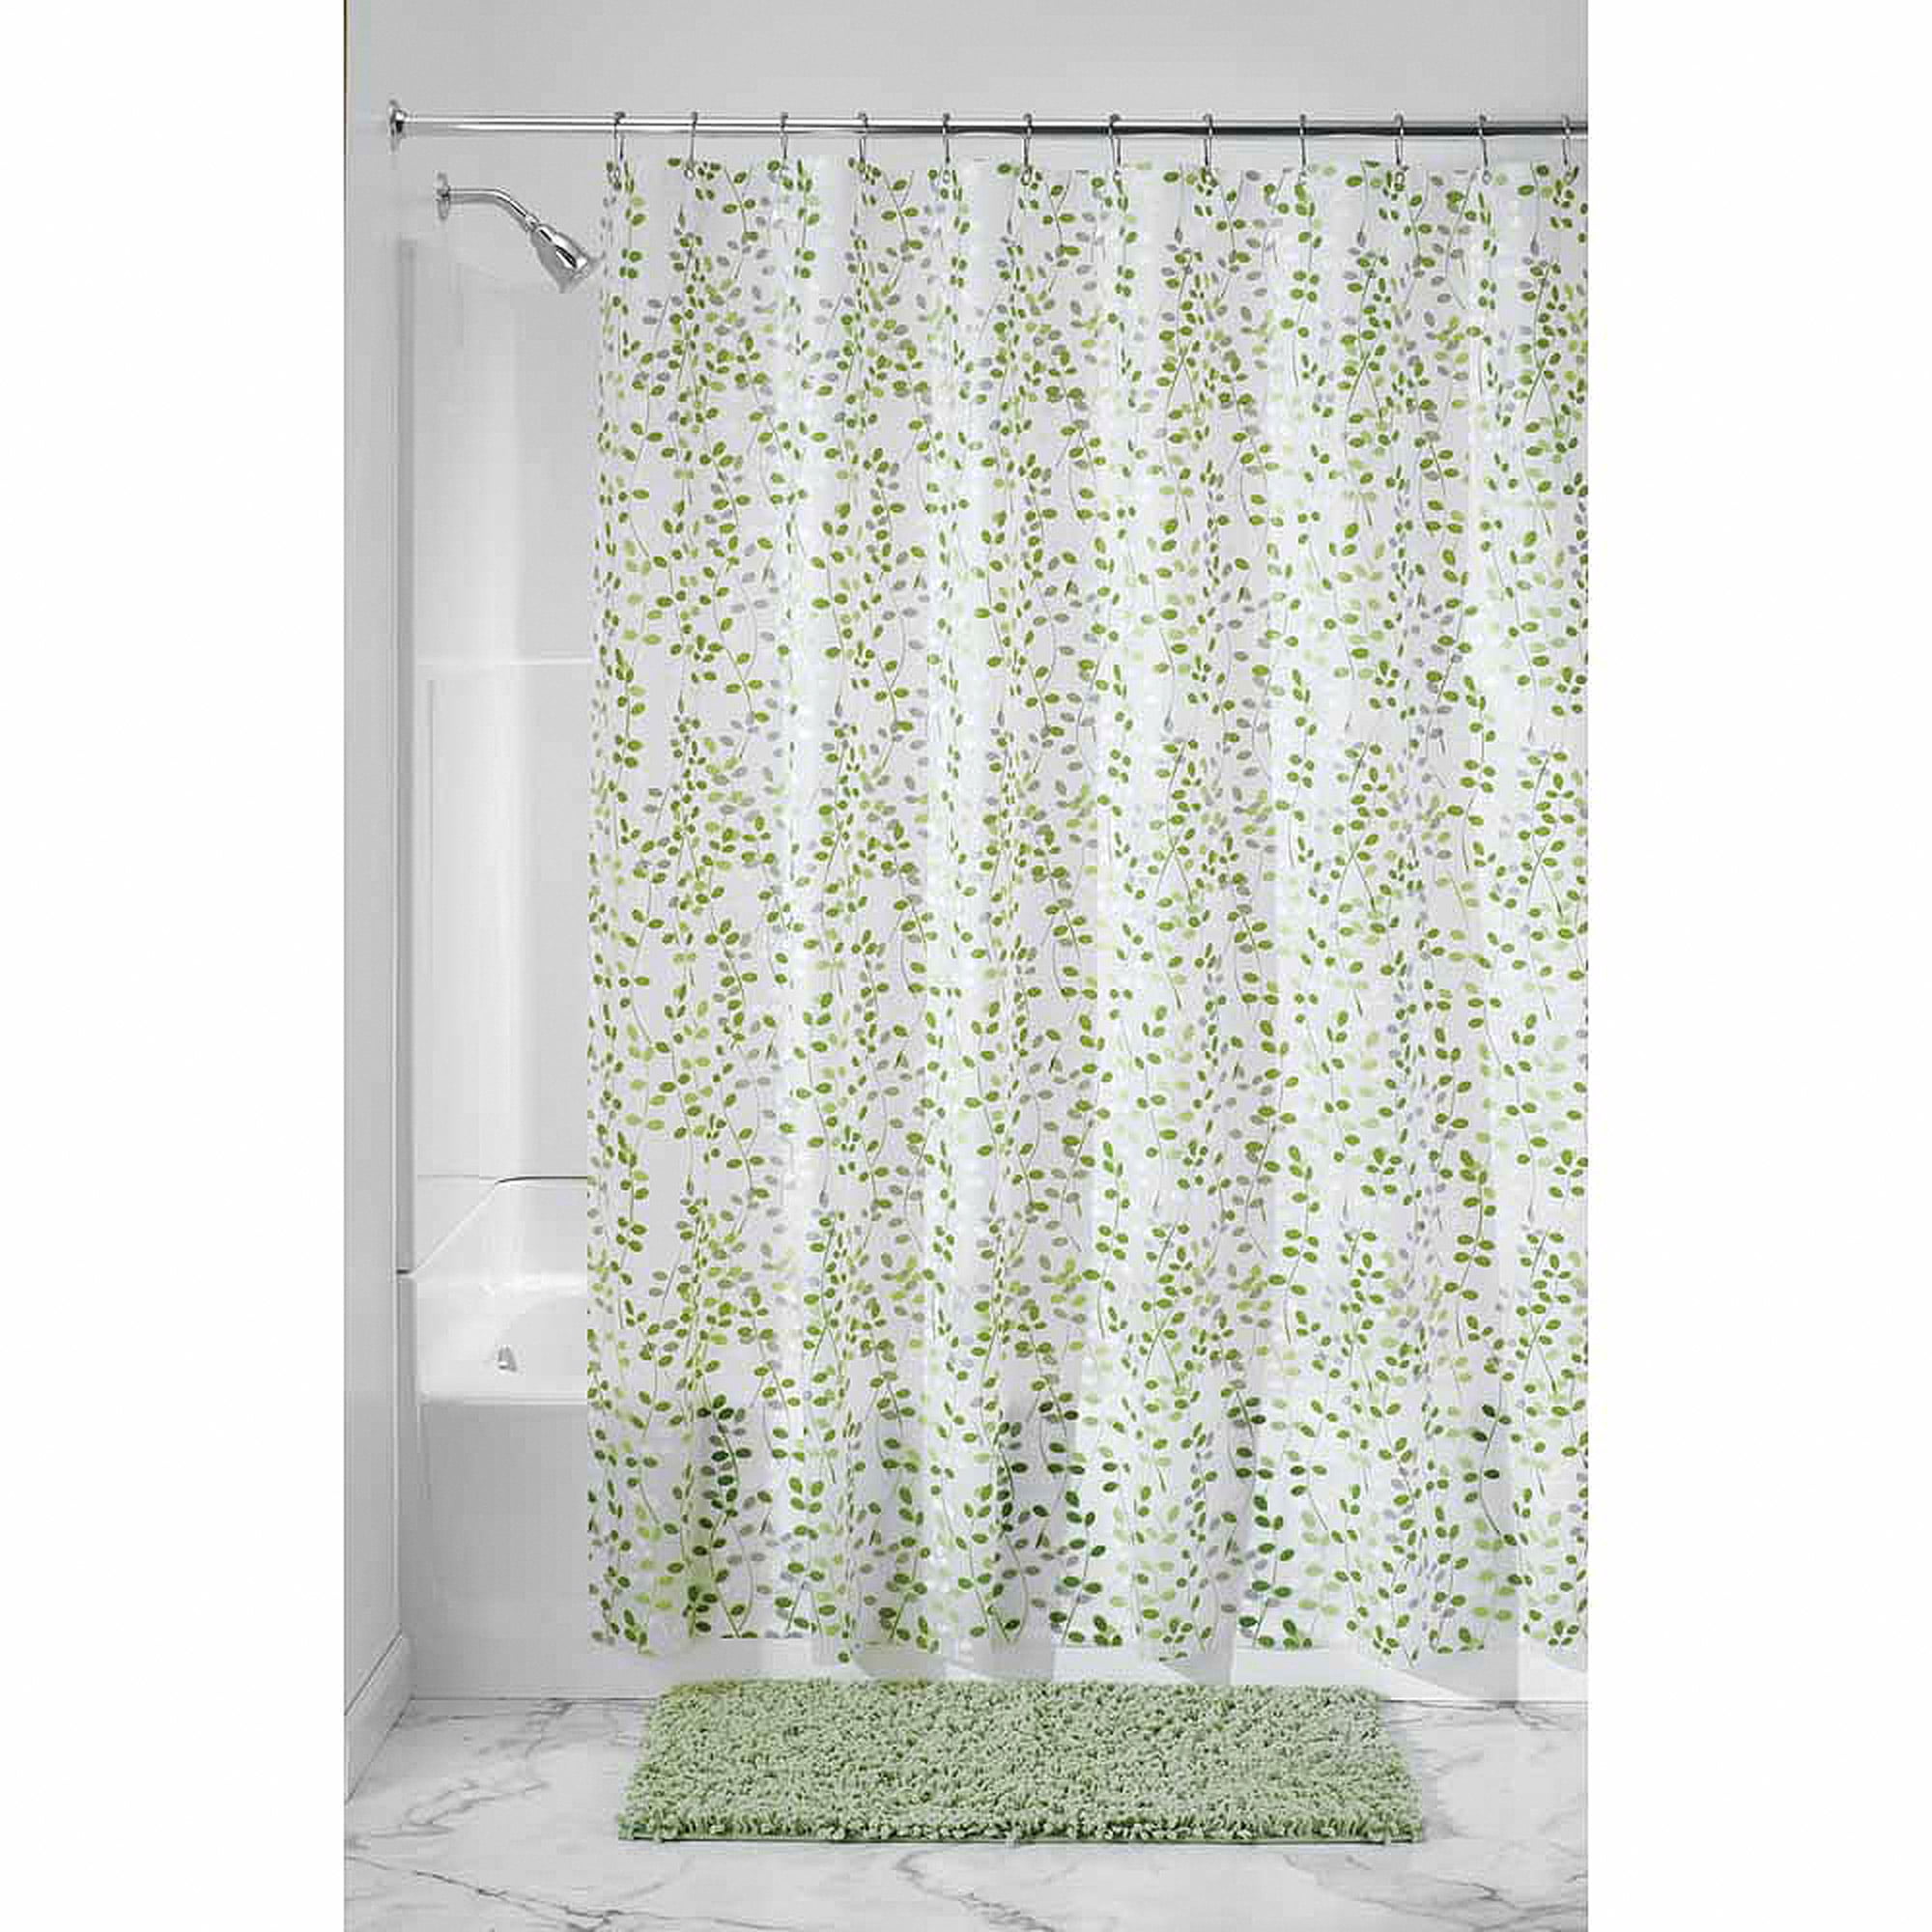 InterDesign Hitchcock Shower Curtain 72 X 72 Clear M9 for sale online 